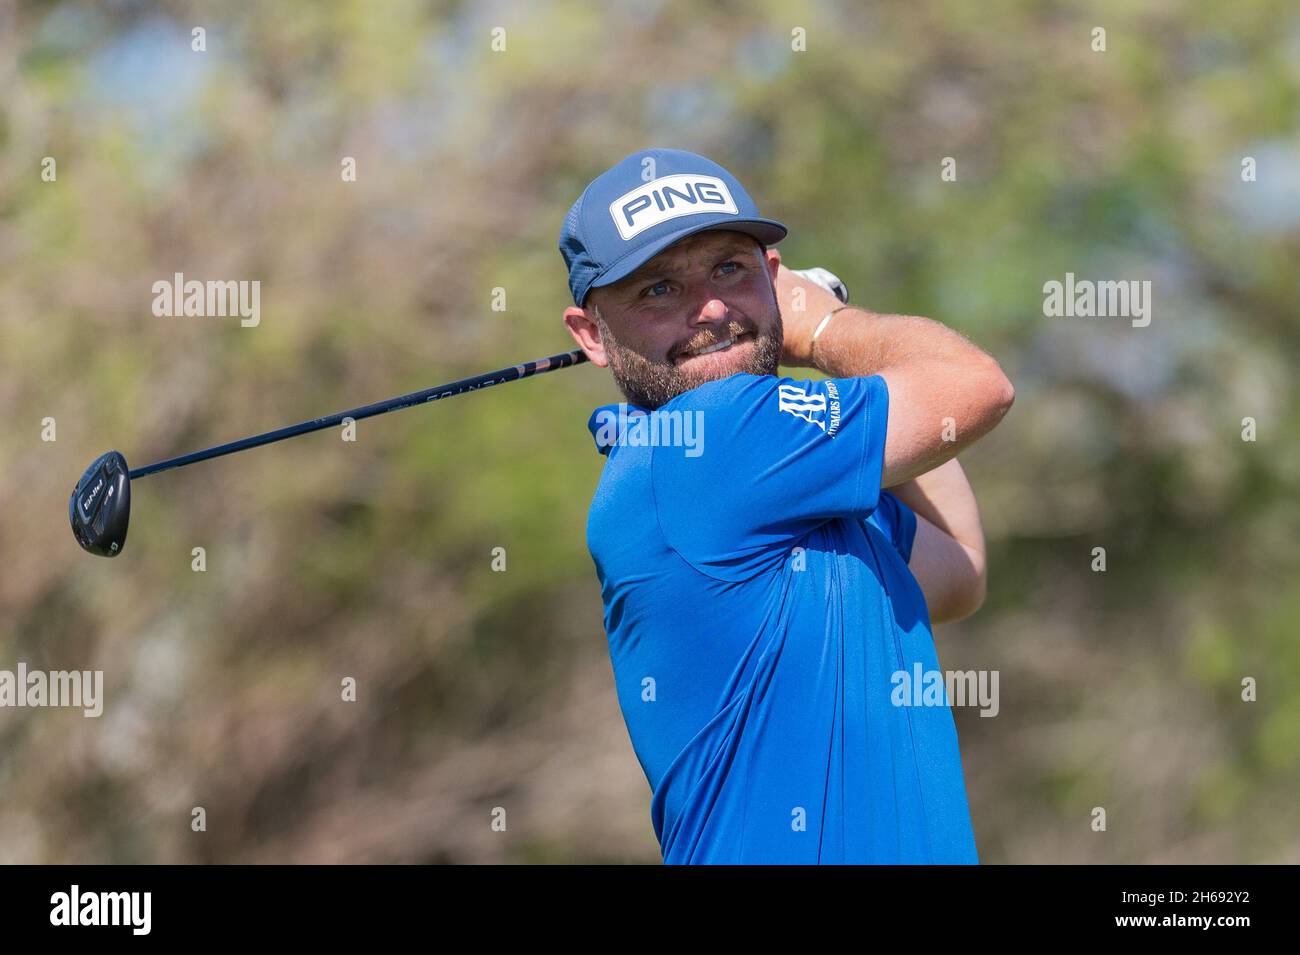 https://c8.alamy.com/comp/2H692Y2/dubai-uae-14th-november-2021andy-sullivan-of-england-tees-off-at-the-third-hole-during-the-aviv-dubai-championship-day-4-at-jumeirah-golf-estates-dubai-uae-on-14-november-2021-photo-by-grant-winter-editorial-use-only-license-required-for-commercial-use-no-use-in-betting-games-or-a-single-clubleagueplayer-publications-credit-uk-sports-pics-ltdalamy-live-news-2H692Y2.jpg